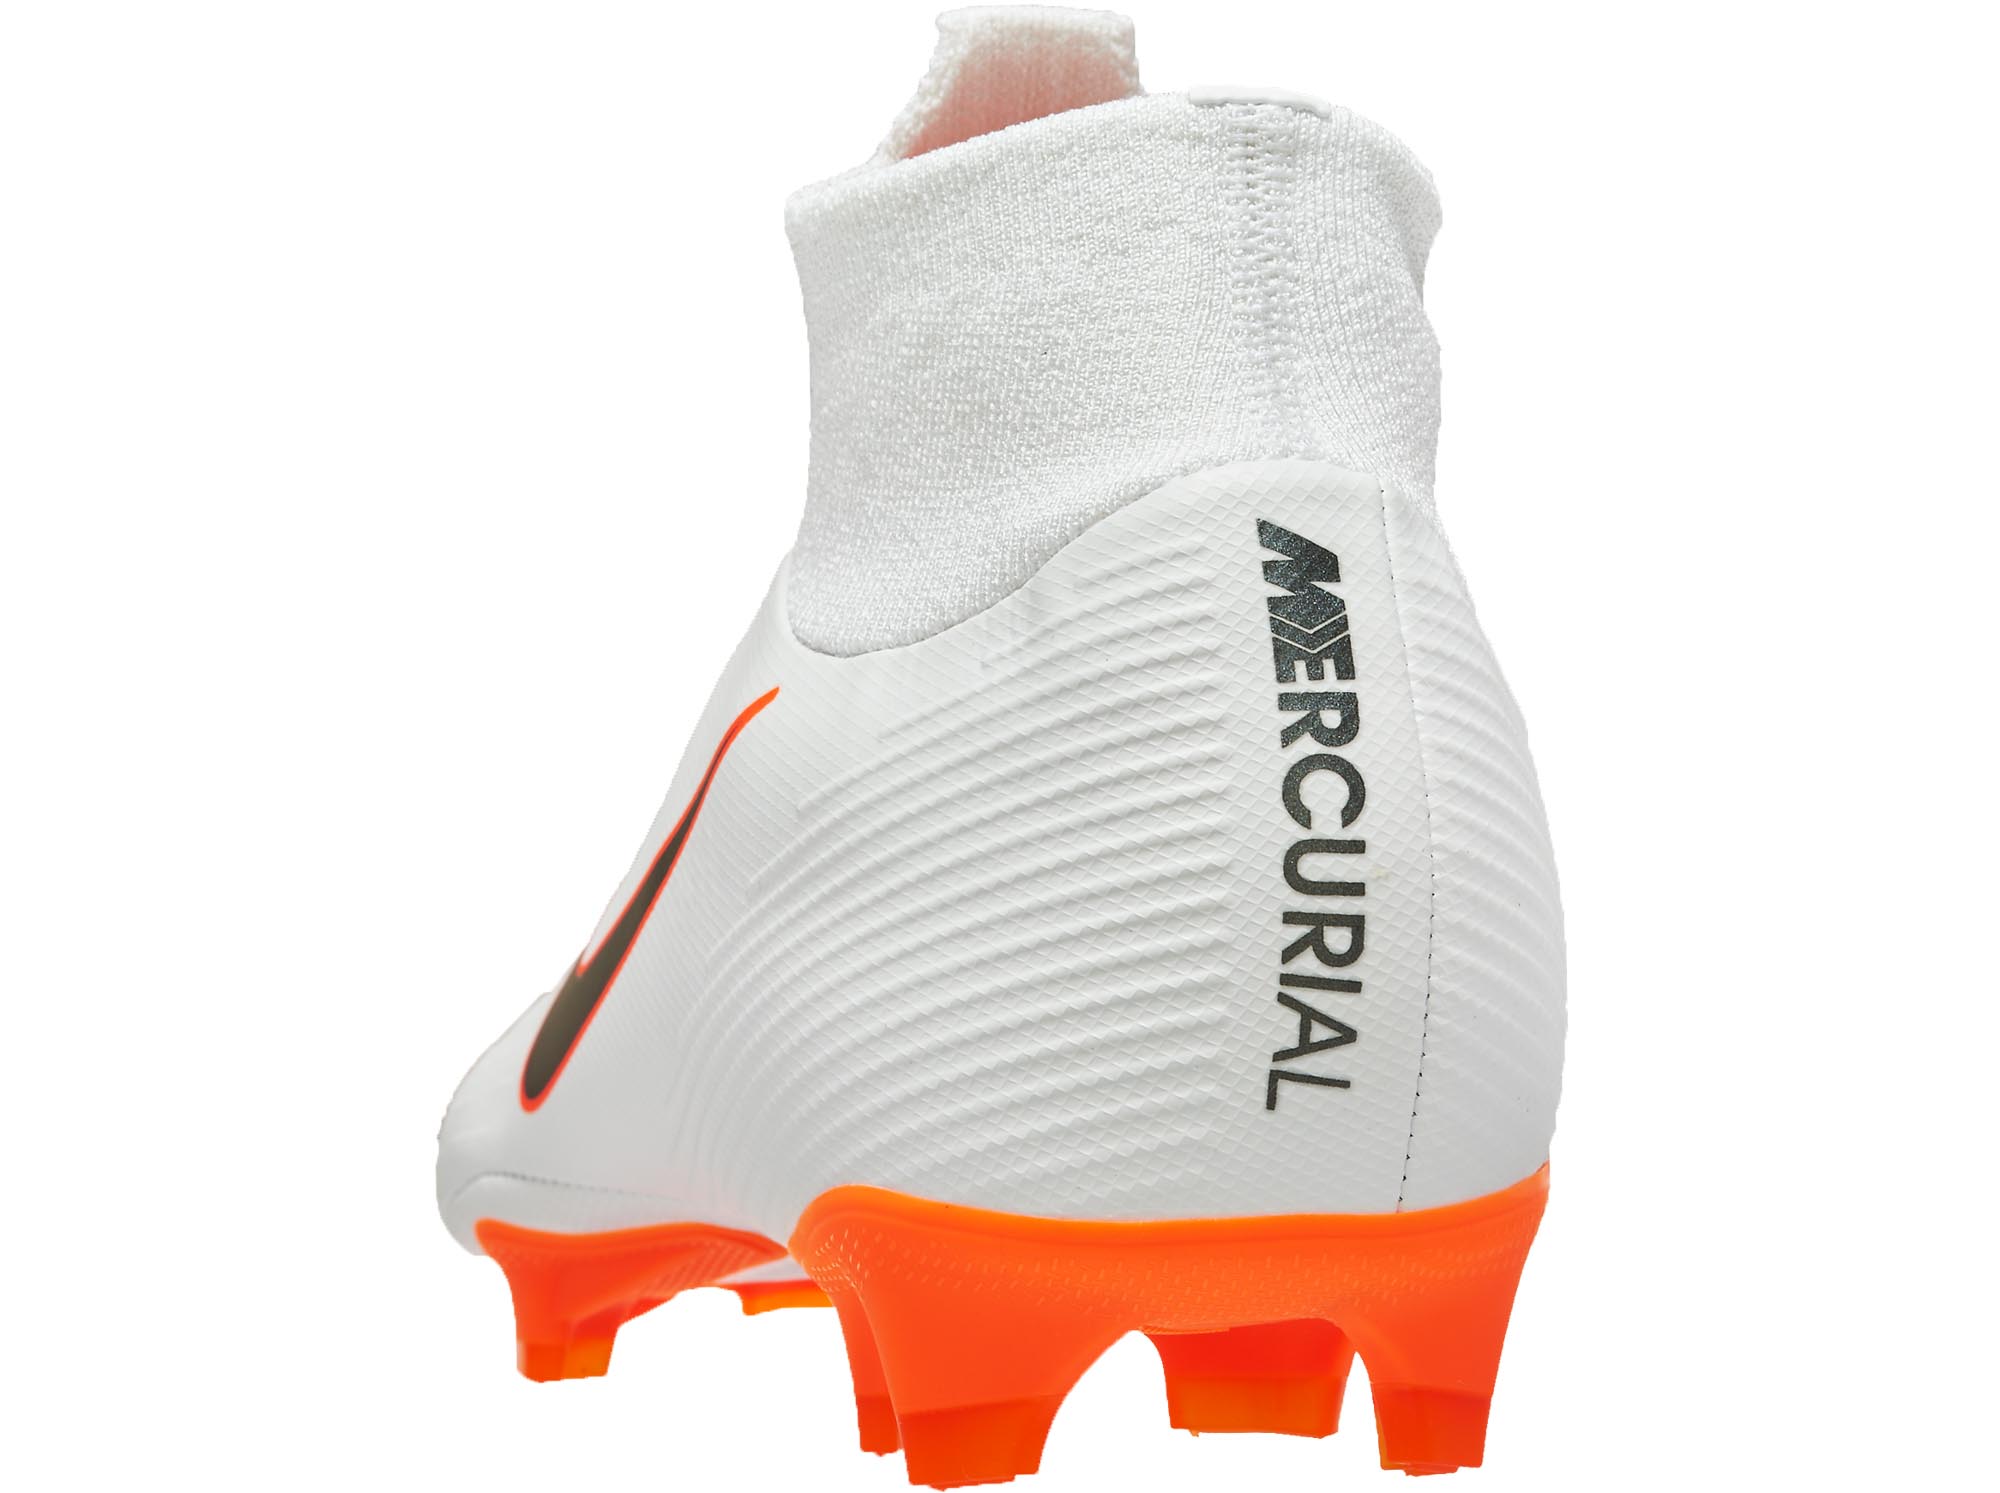 Nike Mercurial Superfly VI Pro AG Pro football chaussures.